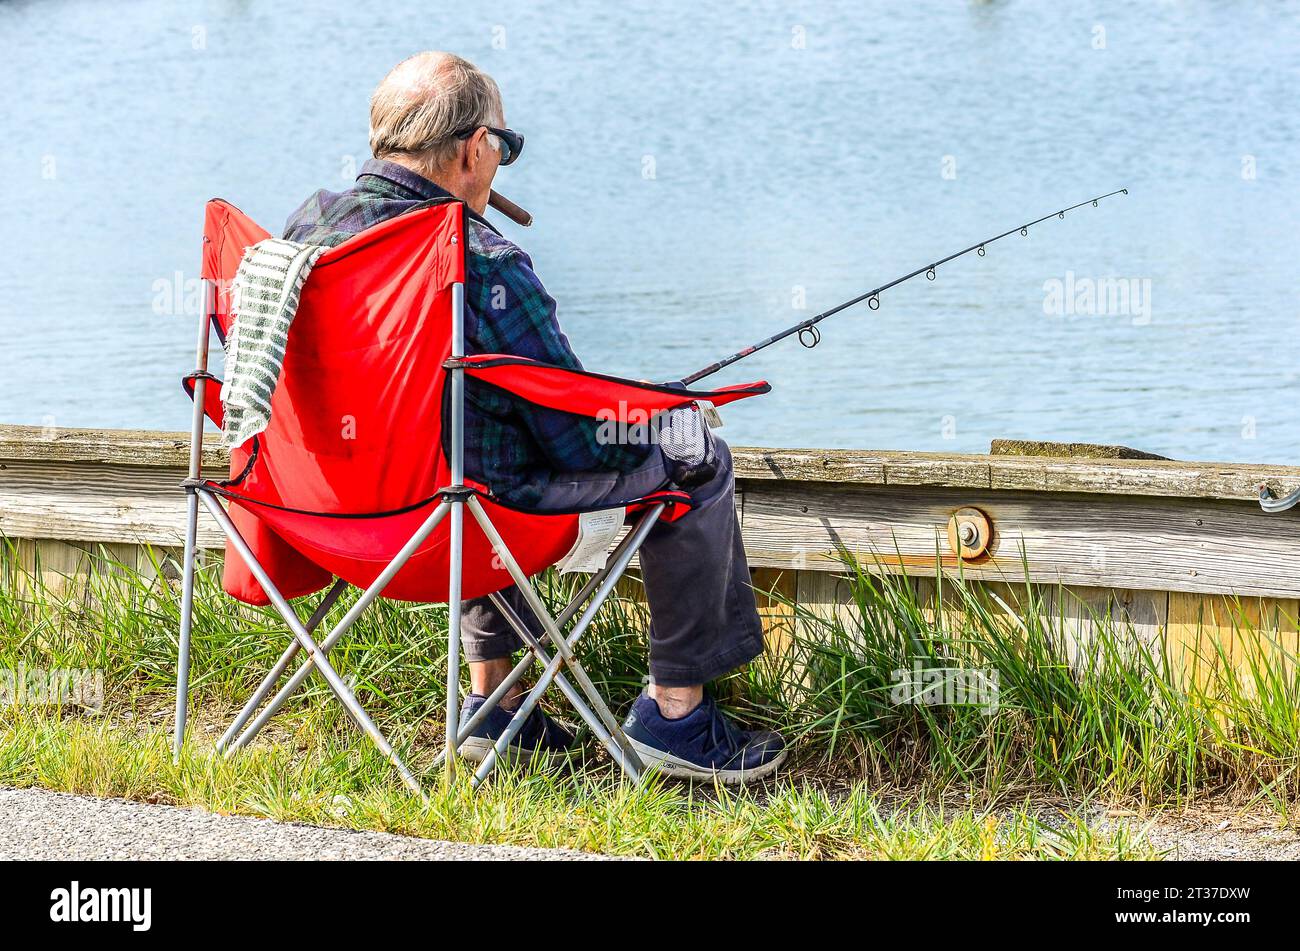 A wonderful day for fishing. All he needs chair rod and reel the right bait everything for big fish. He even has the biggest cigar he could find. Stock Photo